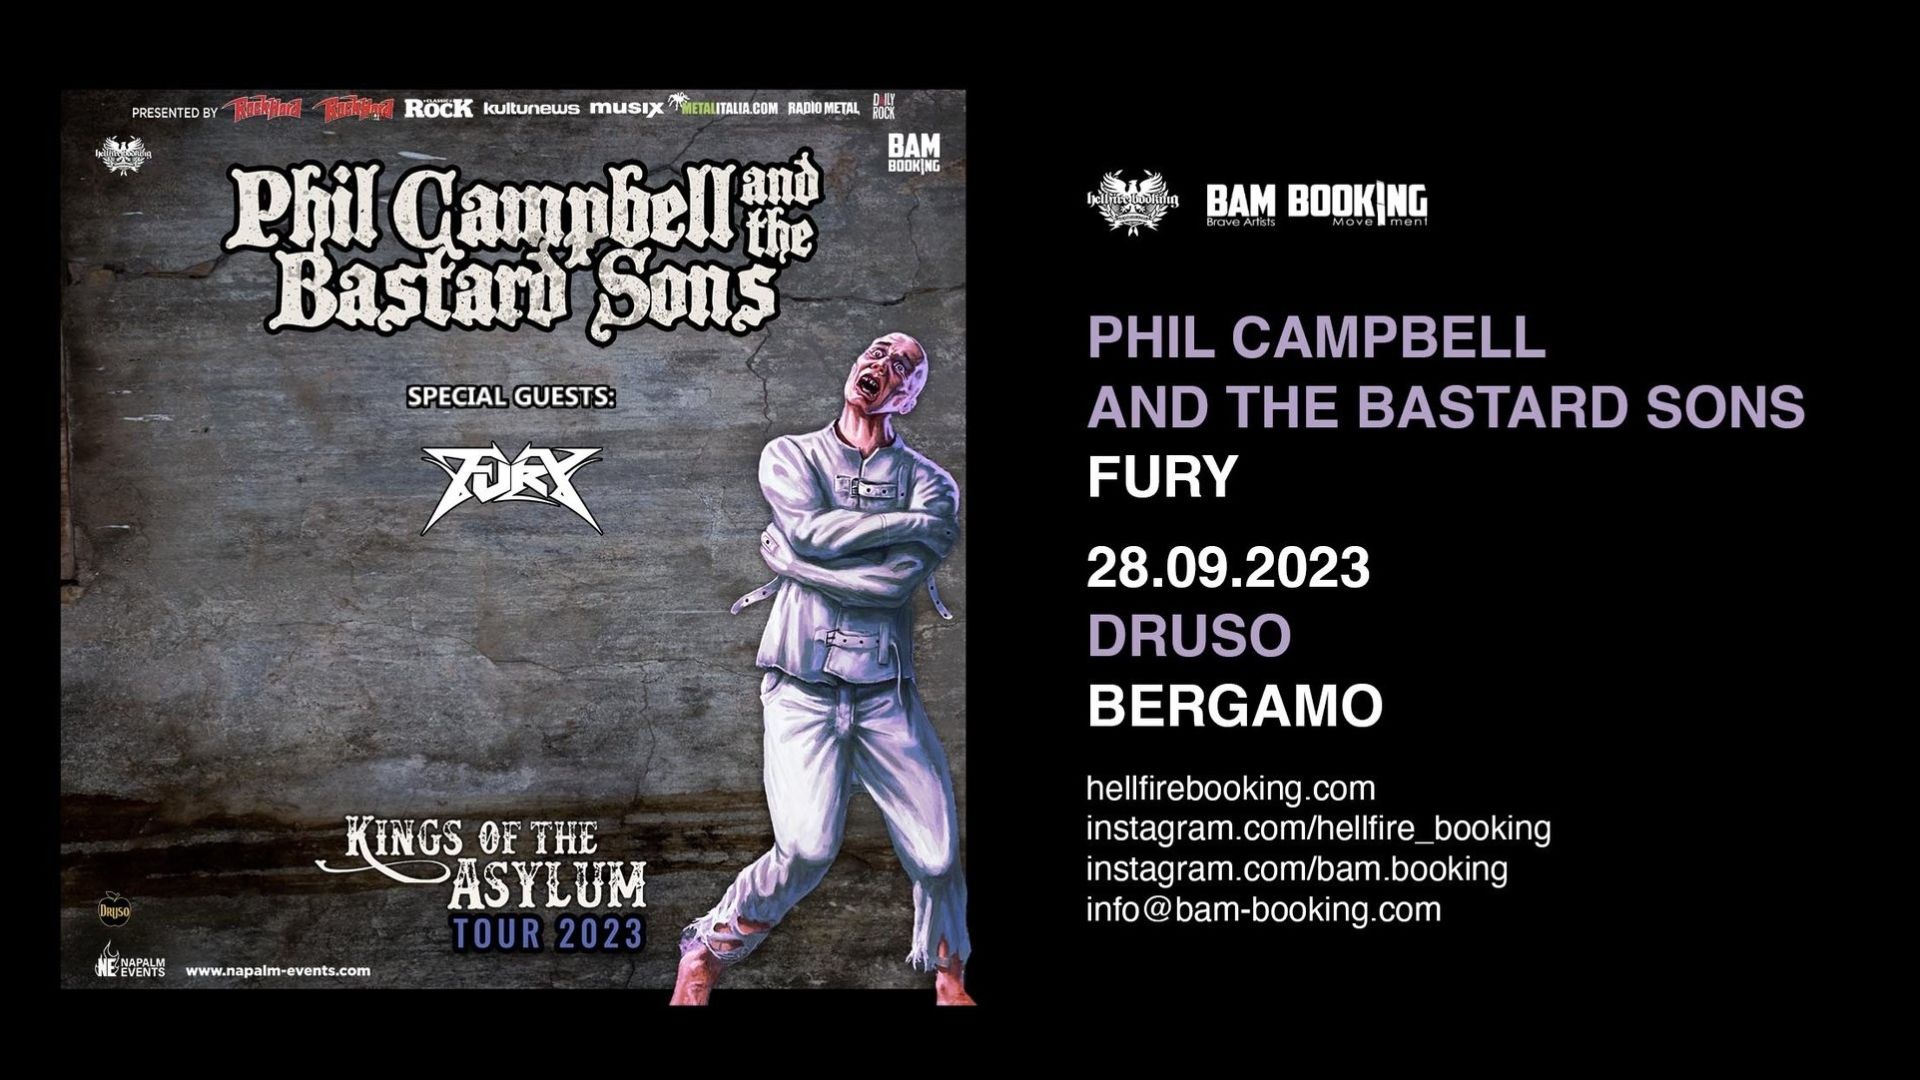 Phil Campbell and the Bastard Sons & Fury